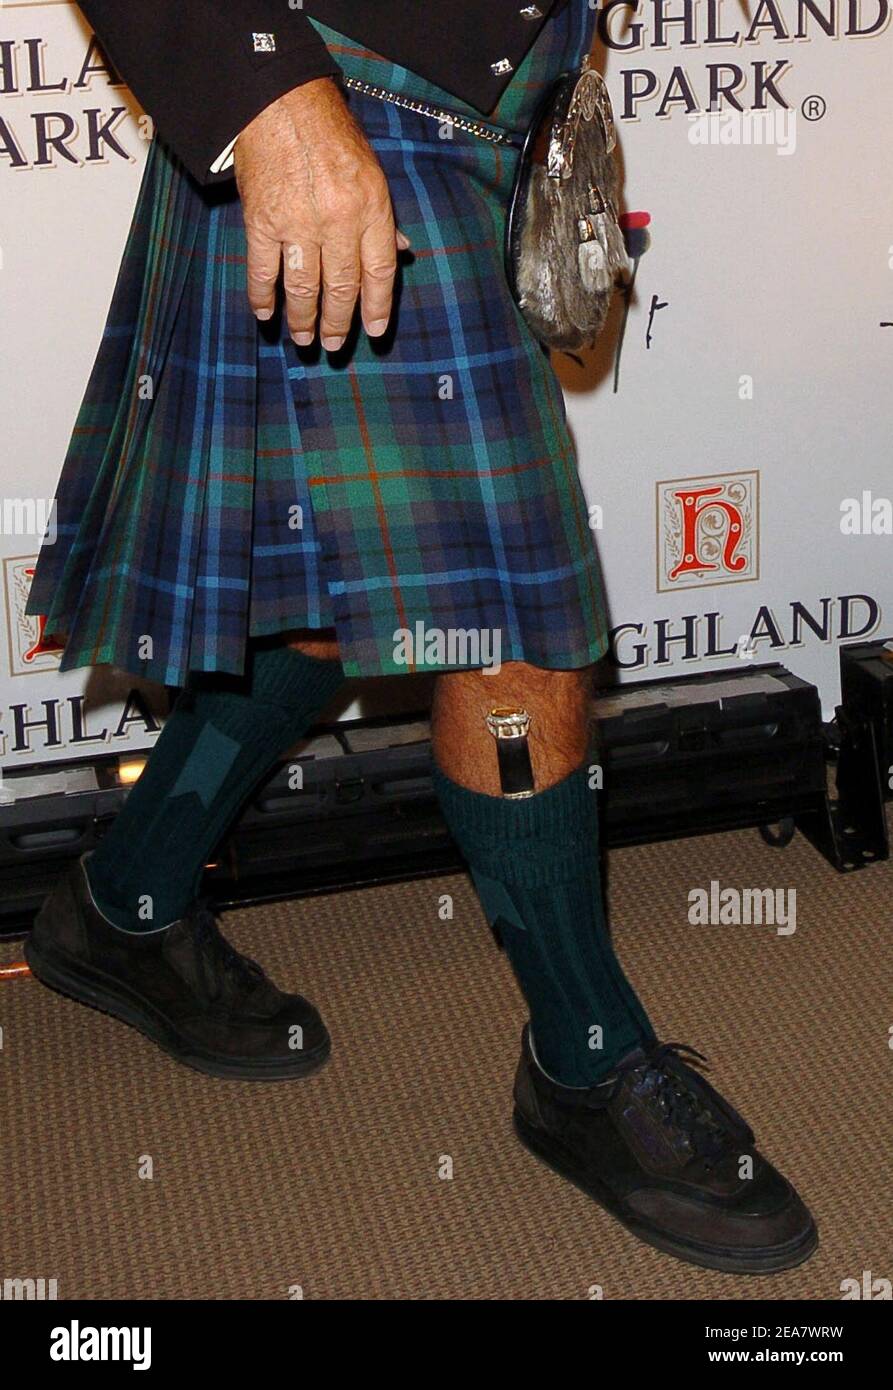 Sir Sean Connery arrives at the Dressed To Kilt party, held at Sotheby's in New York, on Monday, April 5, 2004. (Pictured : Sean Connery). Photo by Nicolas Khayat/ABACA. Stock Photo